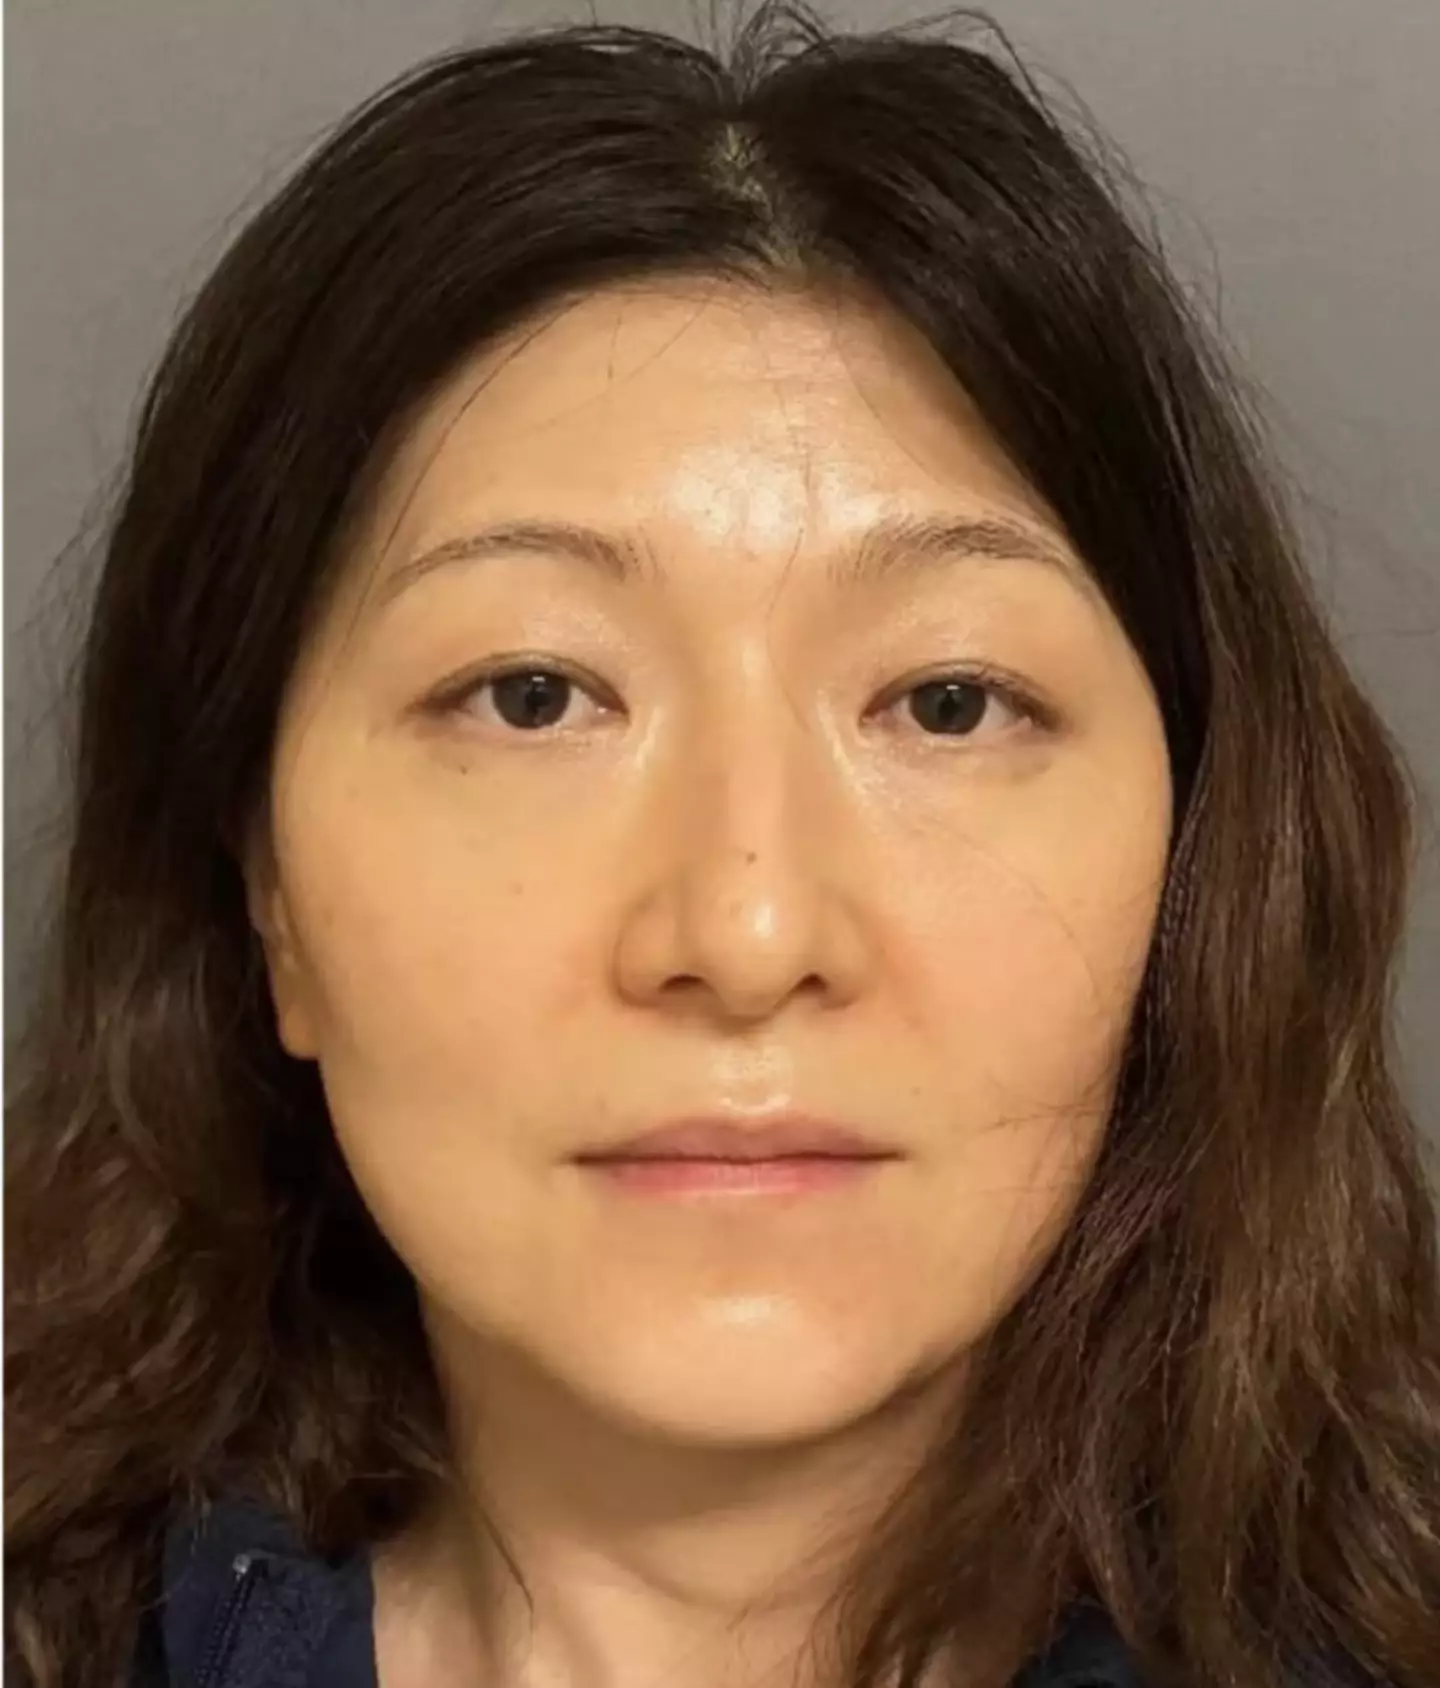 Yue 'Emily' Yue has plead not guilty to the three felony charges against her.